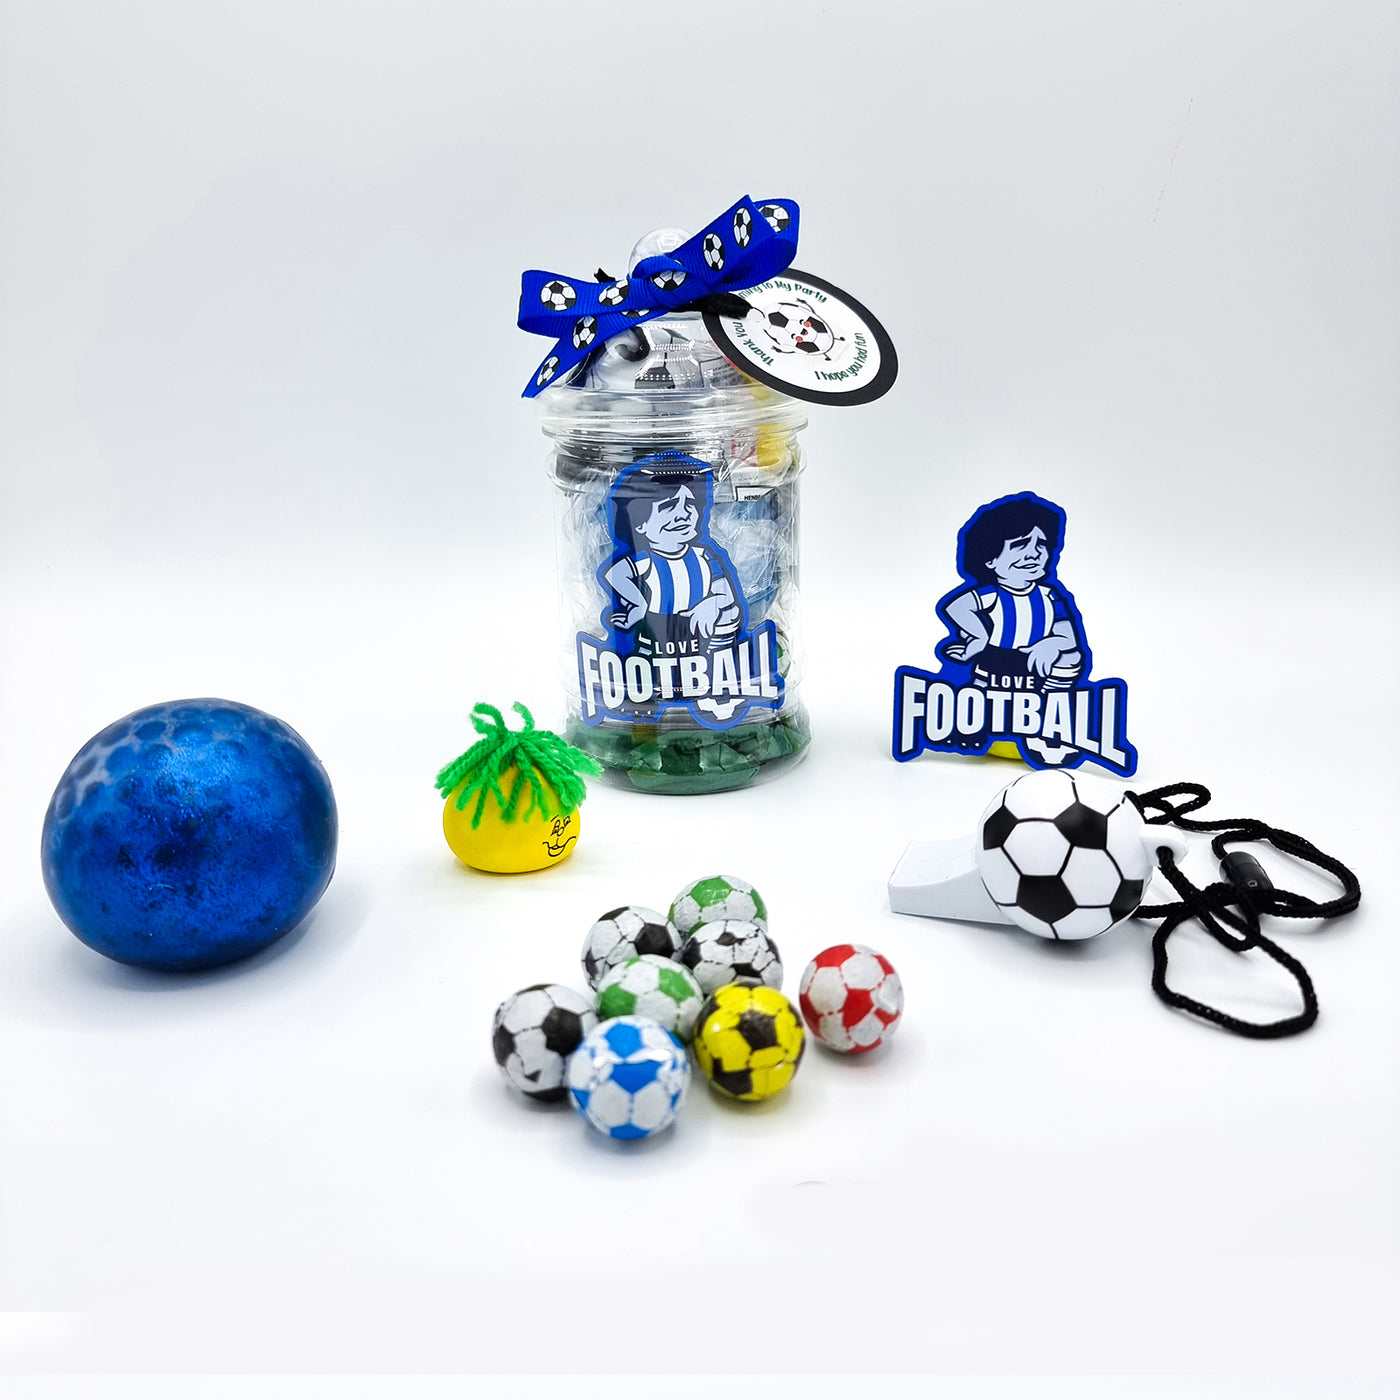 Pre Filled Football Birthday Party Favours In Vintage Style Jars With Toys, Maradona Fridge Magnets And Sweets For Boys And Girls.